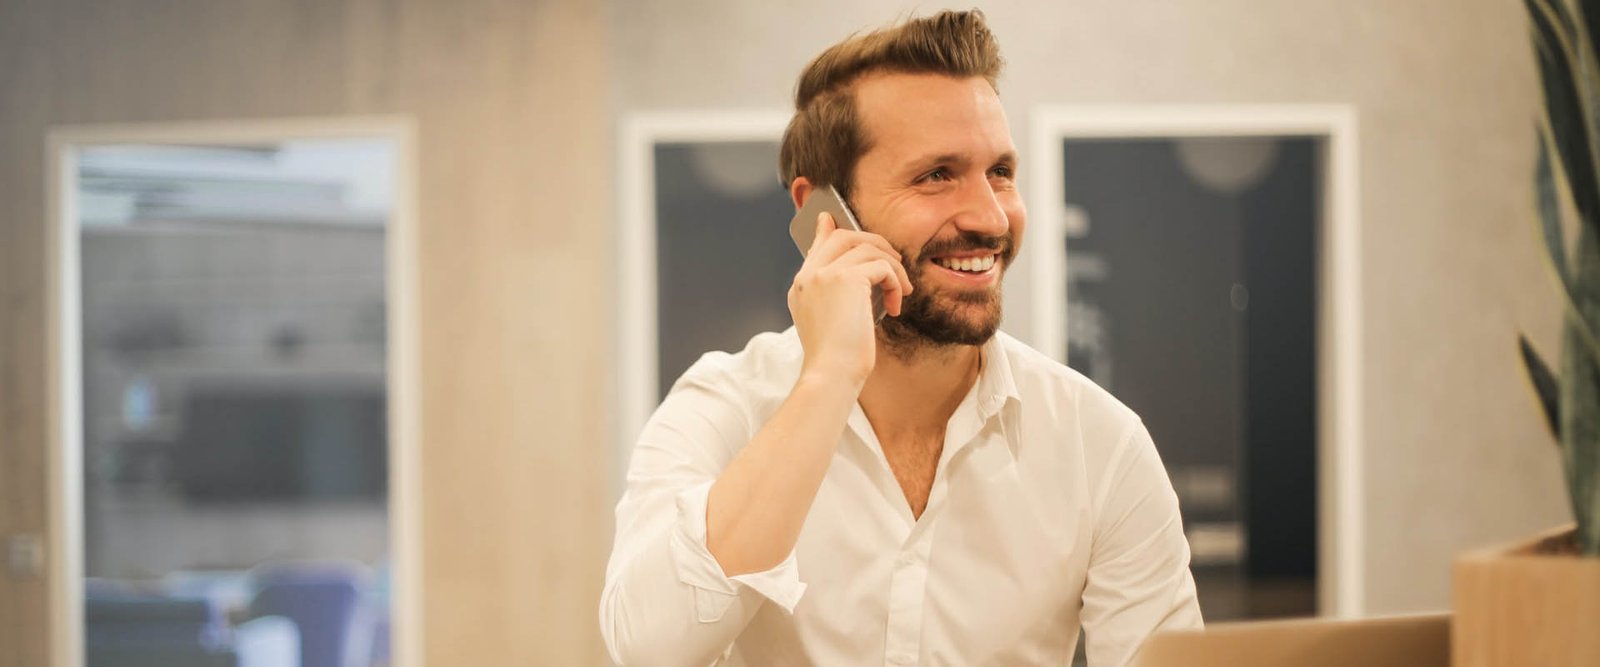 A man talking on the phone, smiling